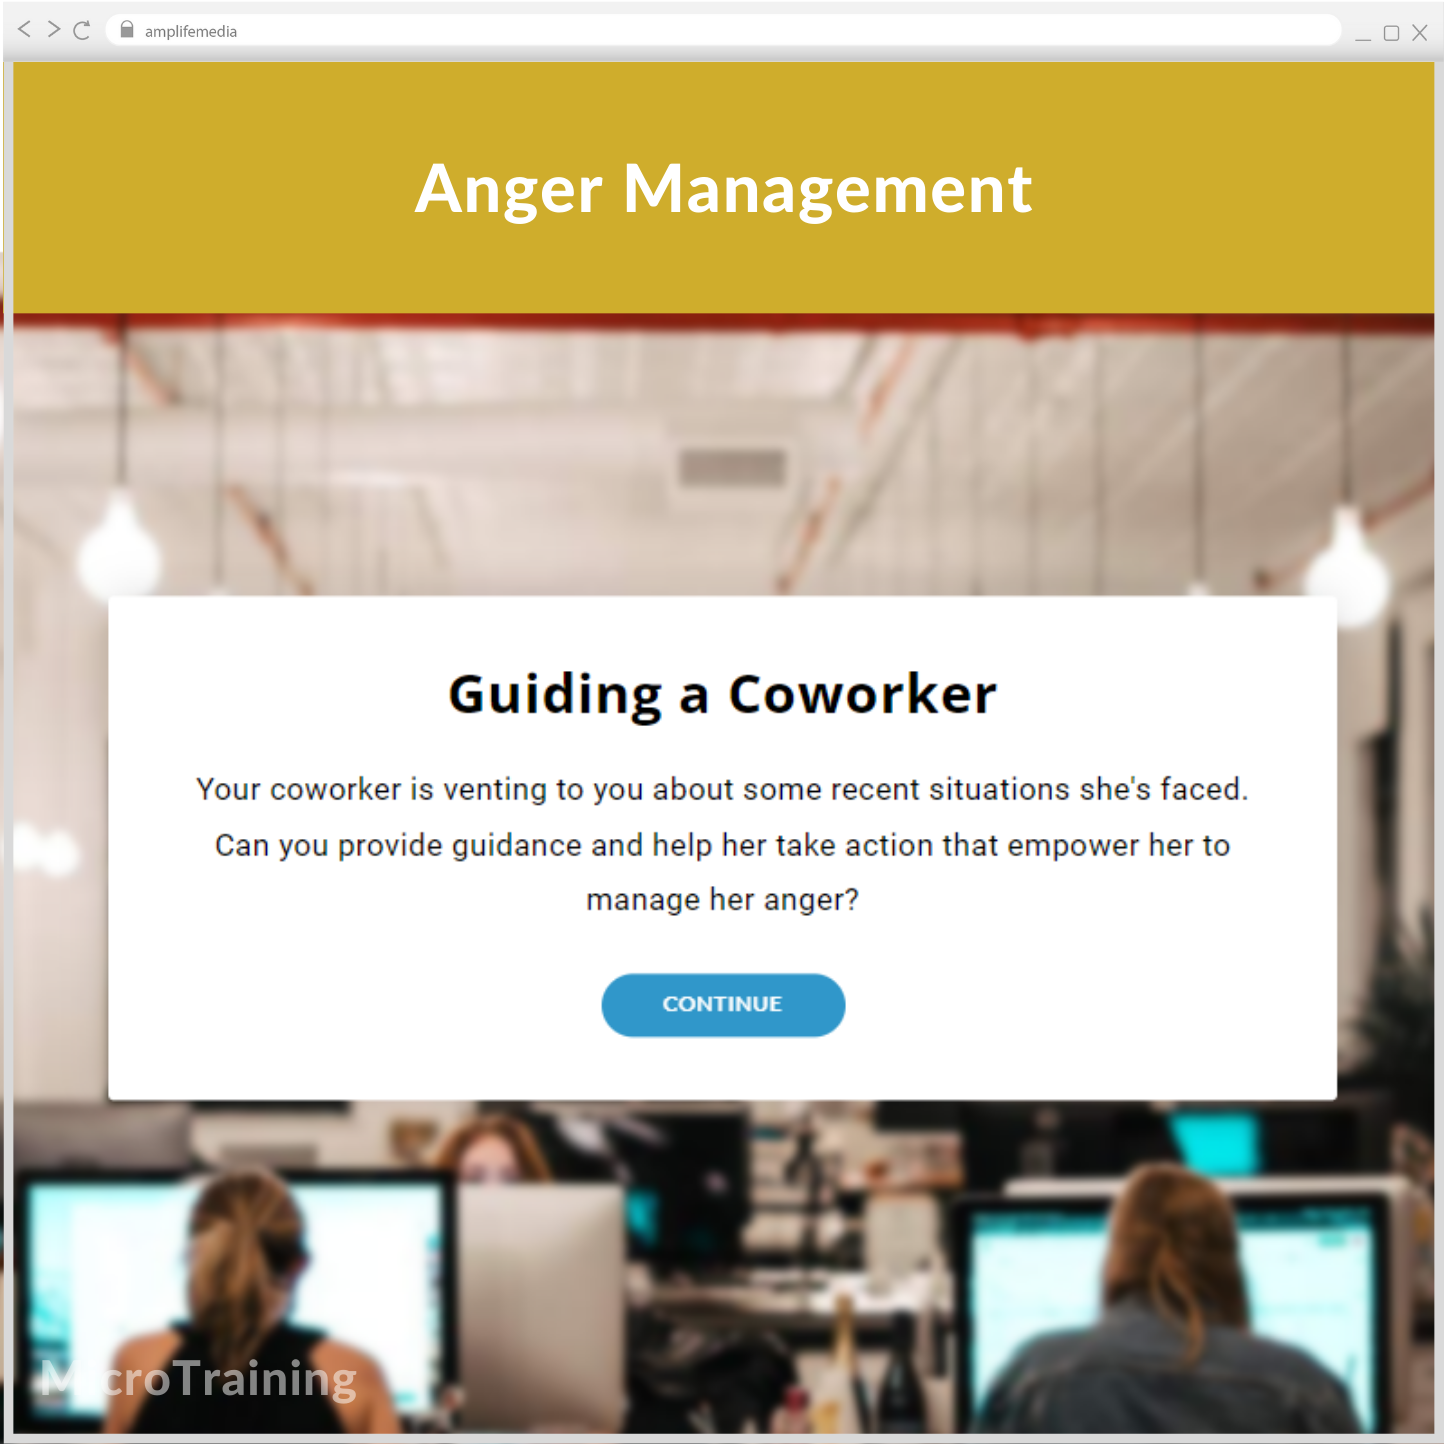 Subscription to Wellbeing Media: Anger Management MT 622